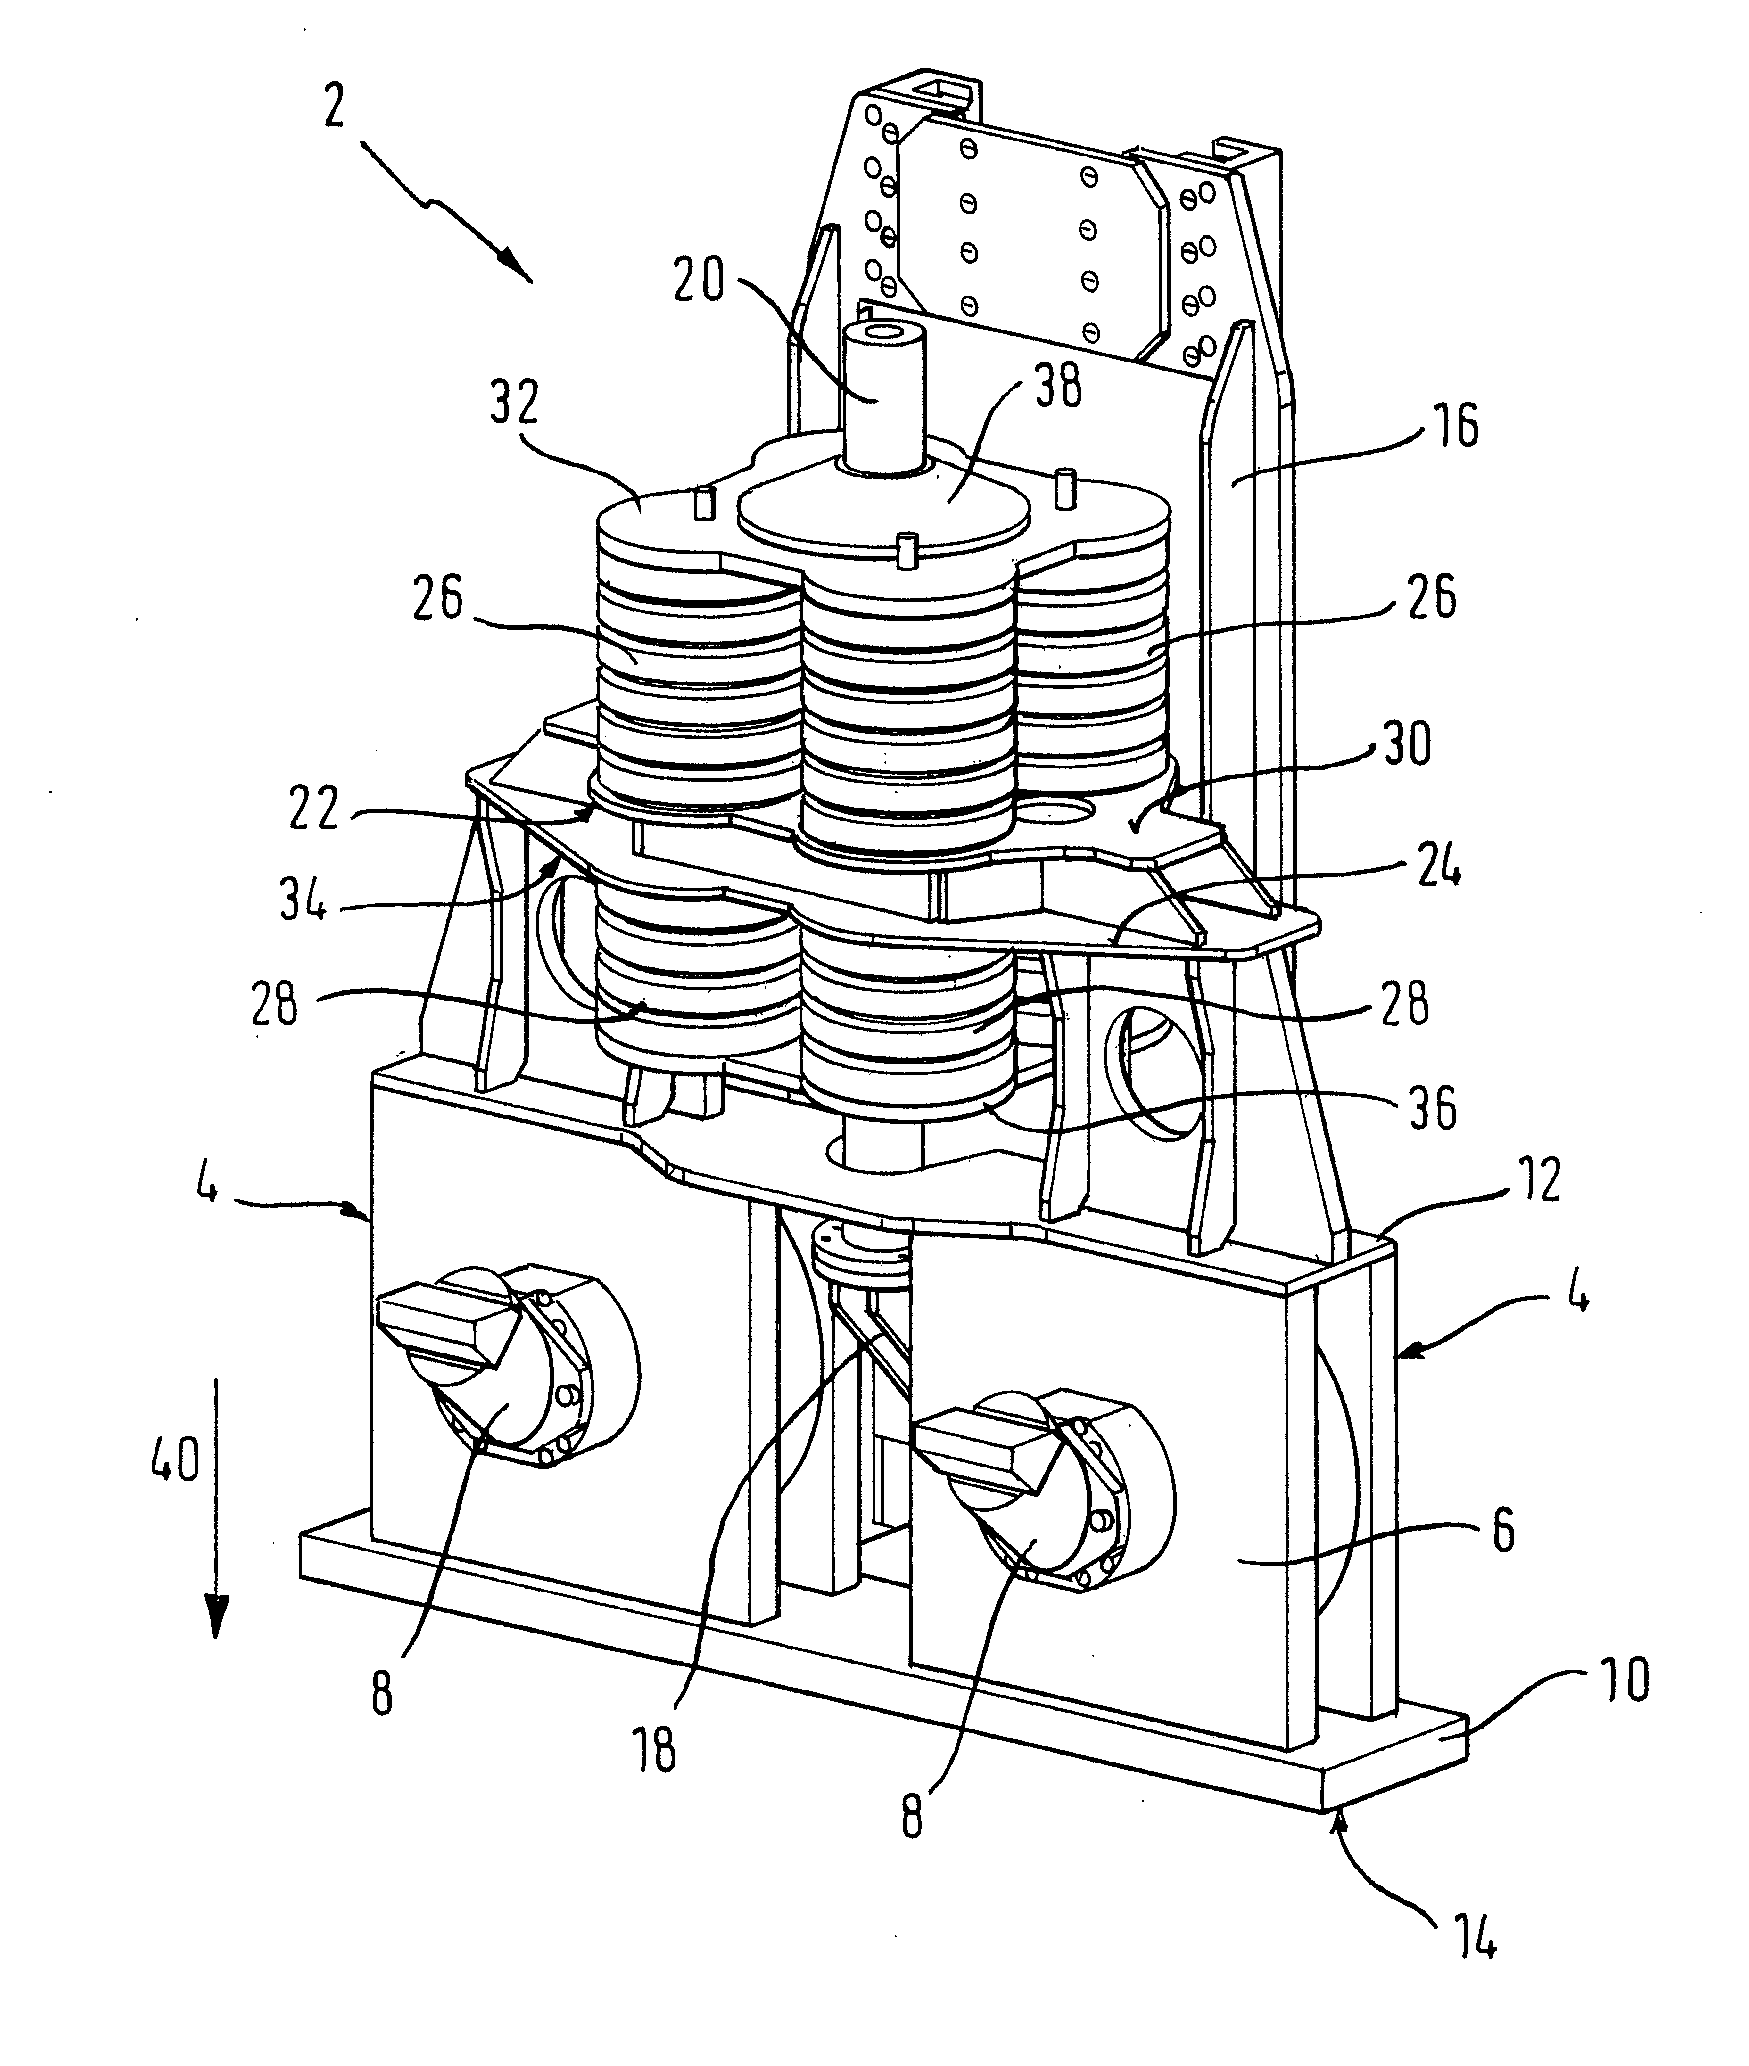 Device for a Vibration Generator